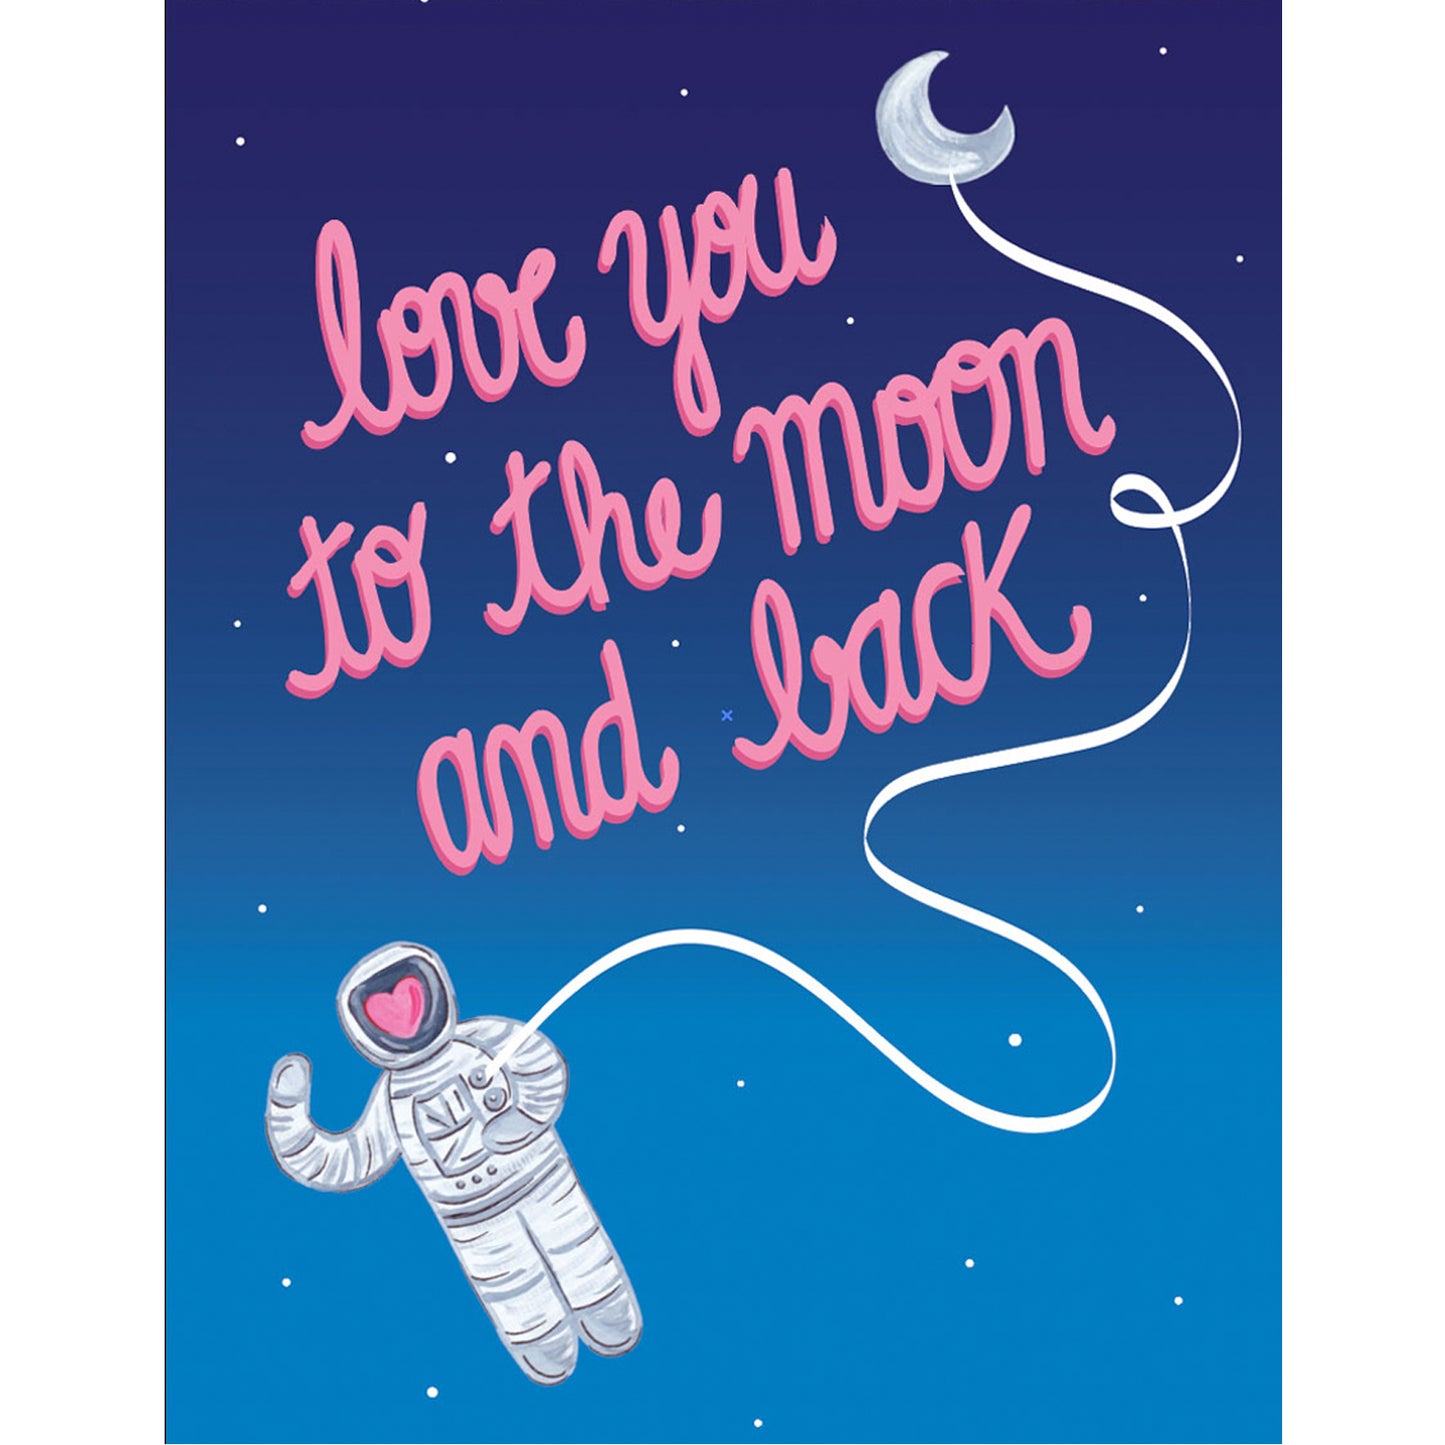 Love You to the Moon & Back